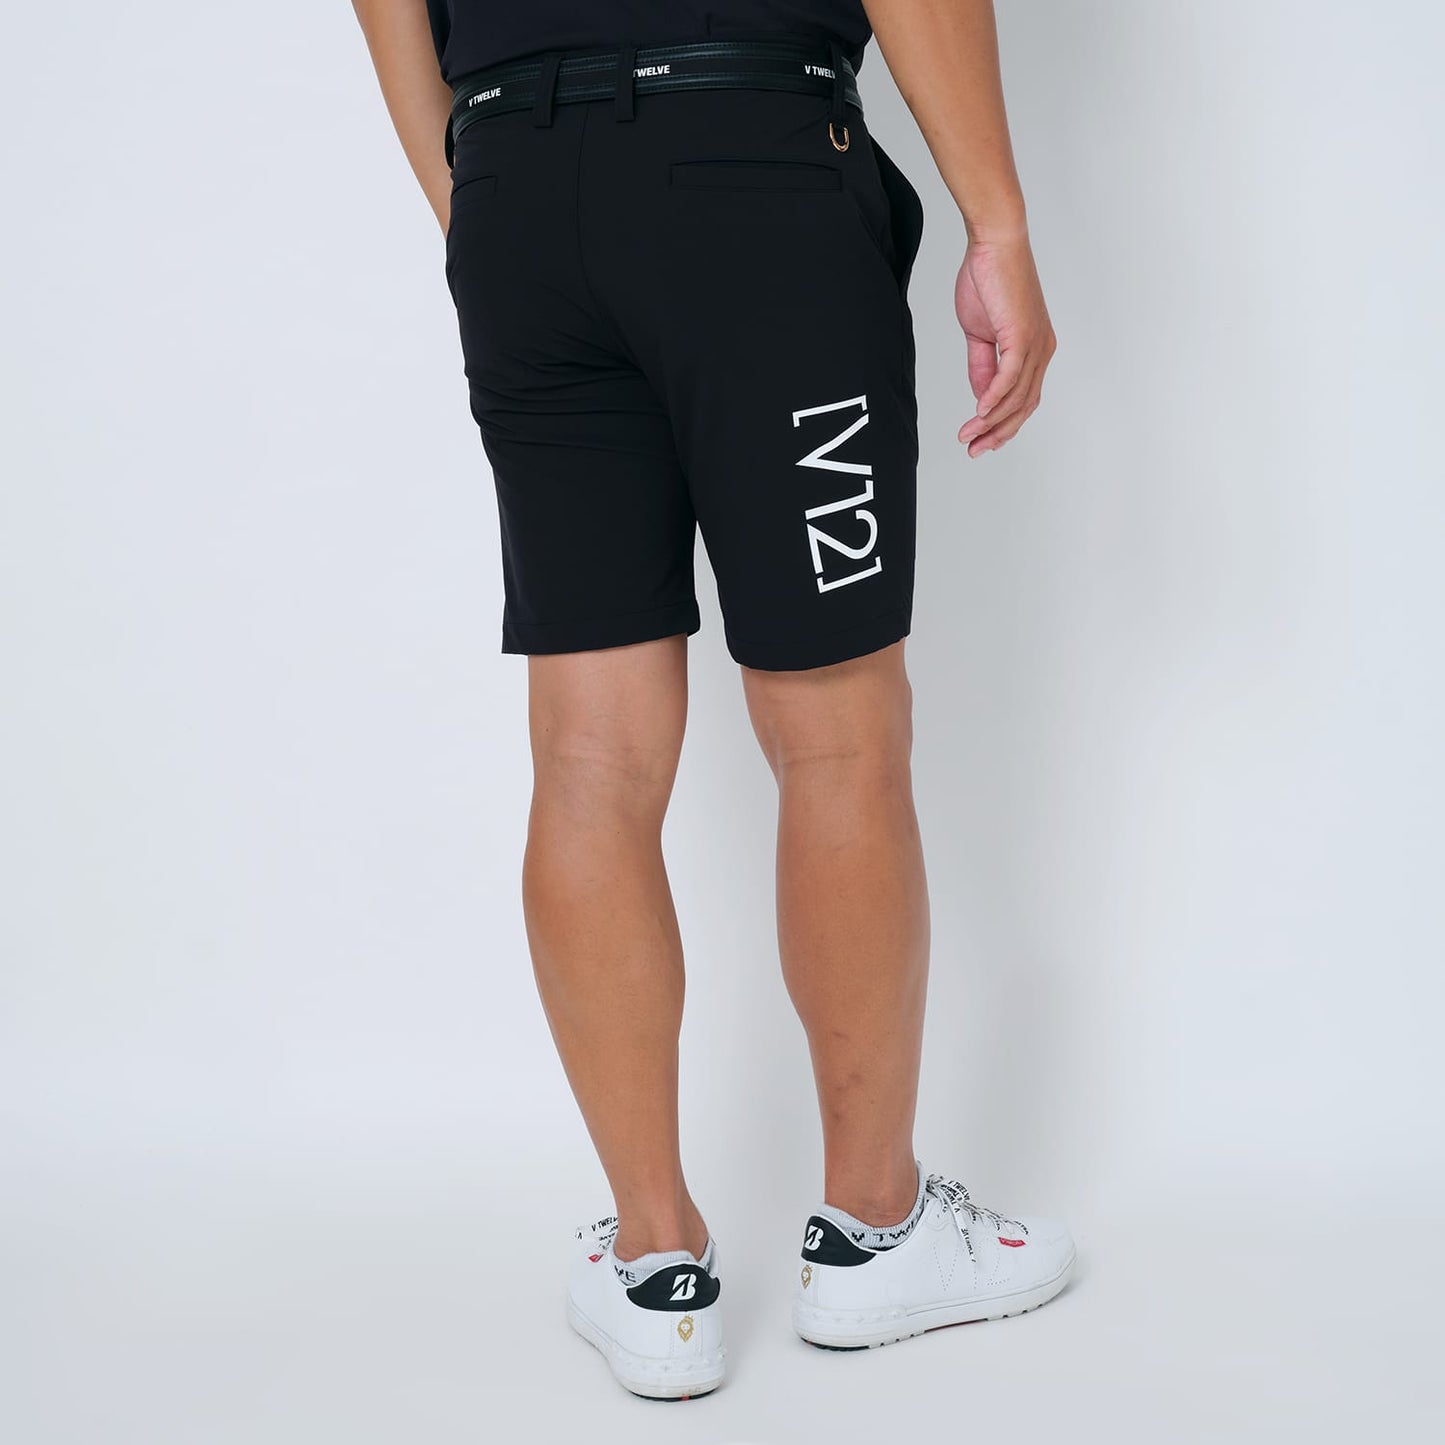 BYVER SHORTS